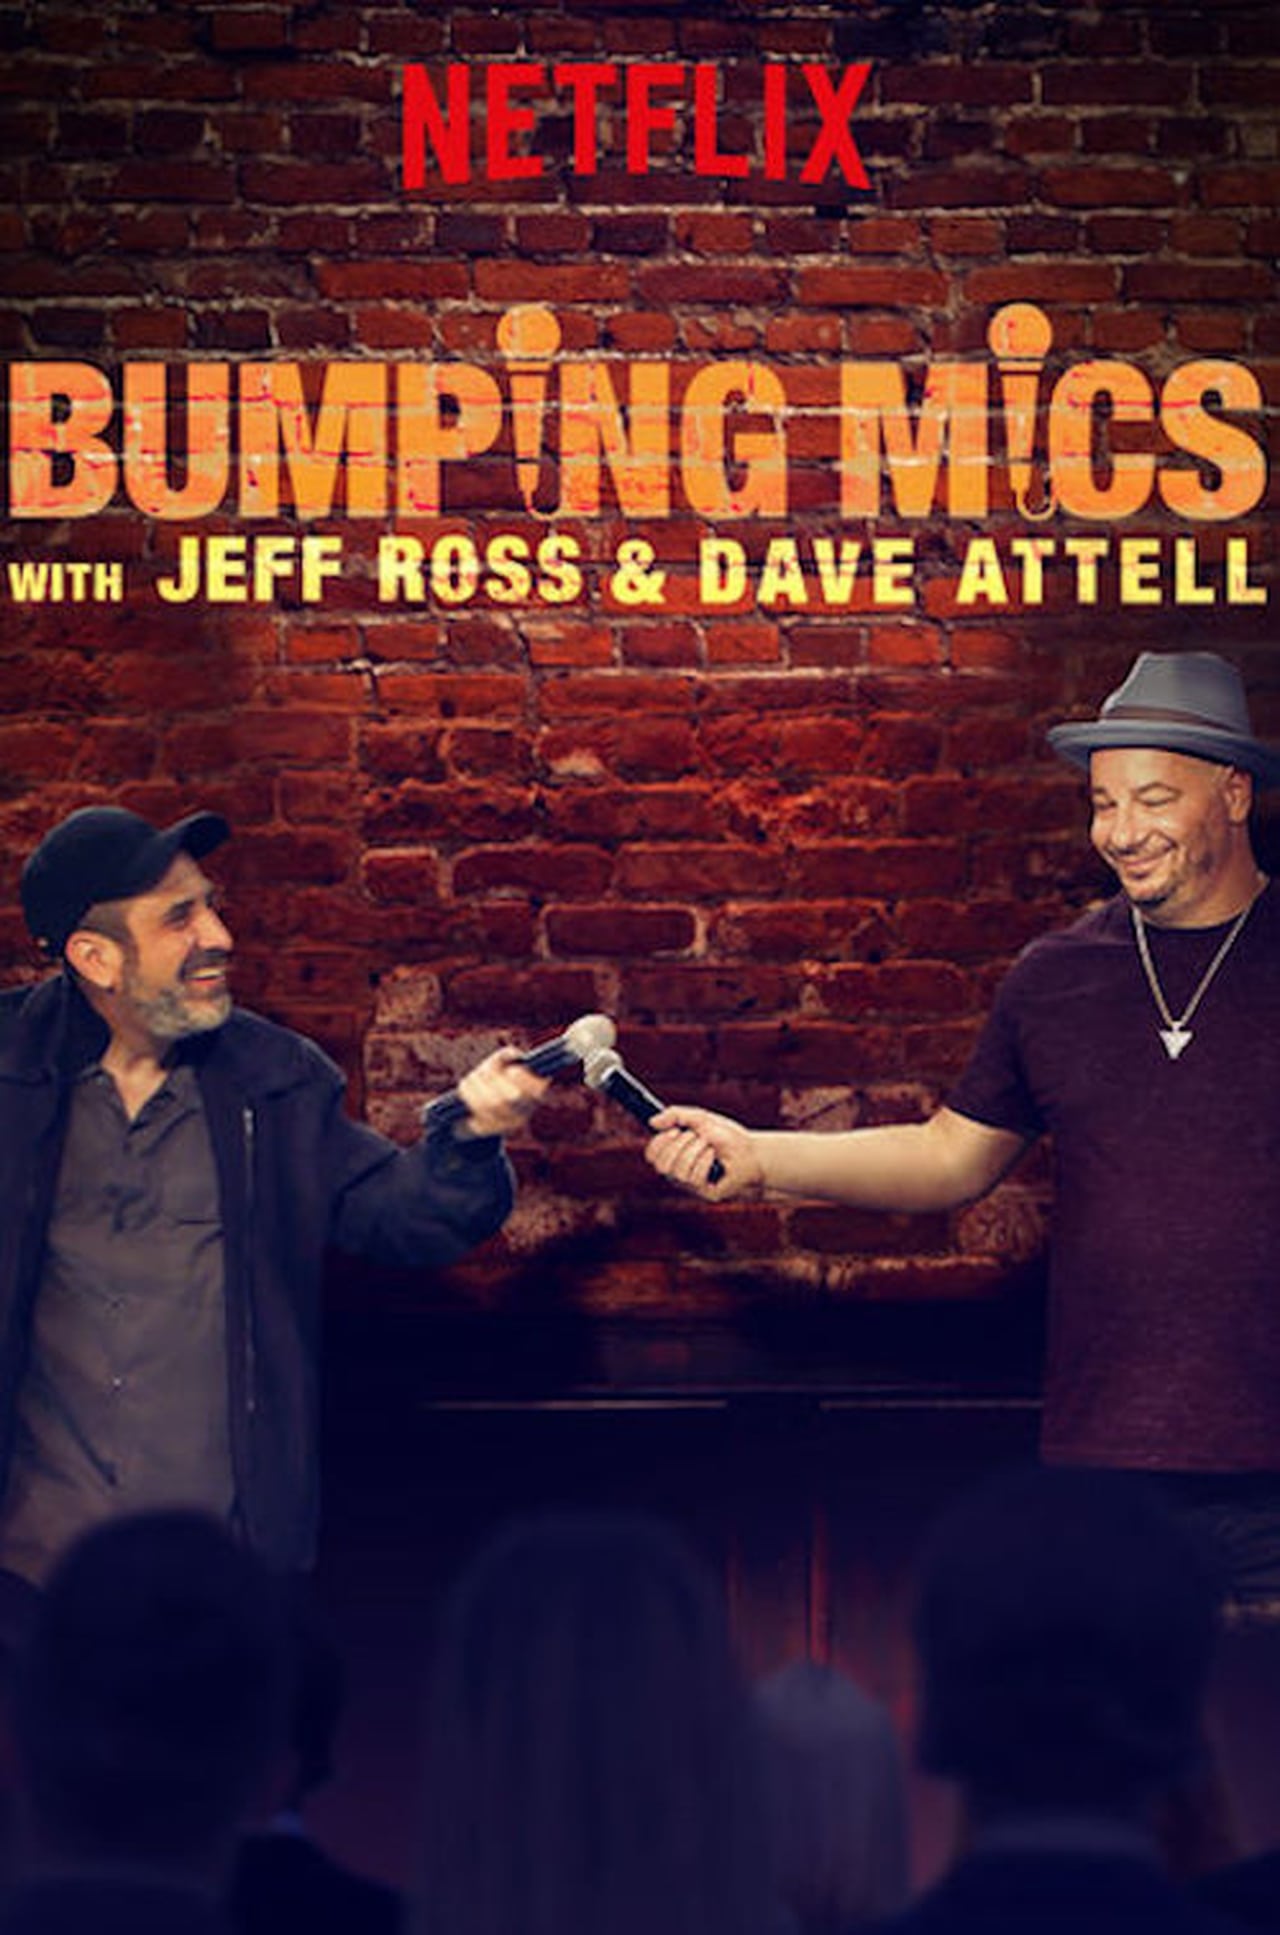 jeff ross and dave attell tour